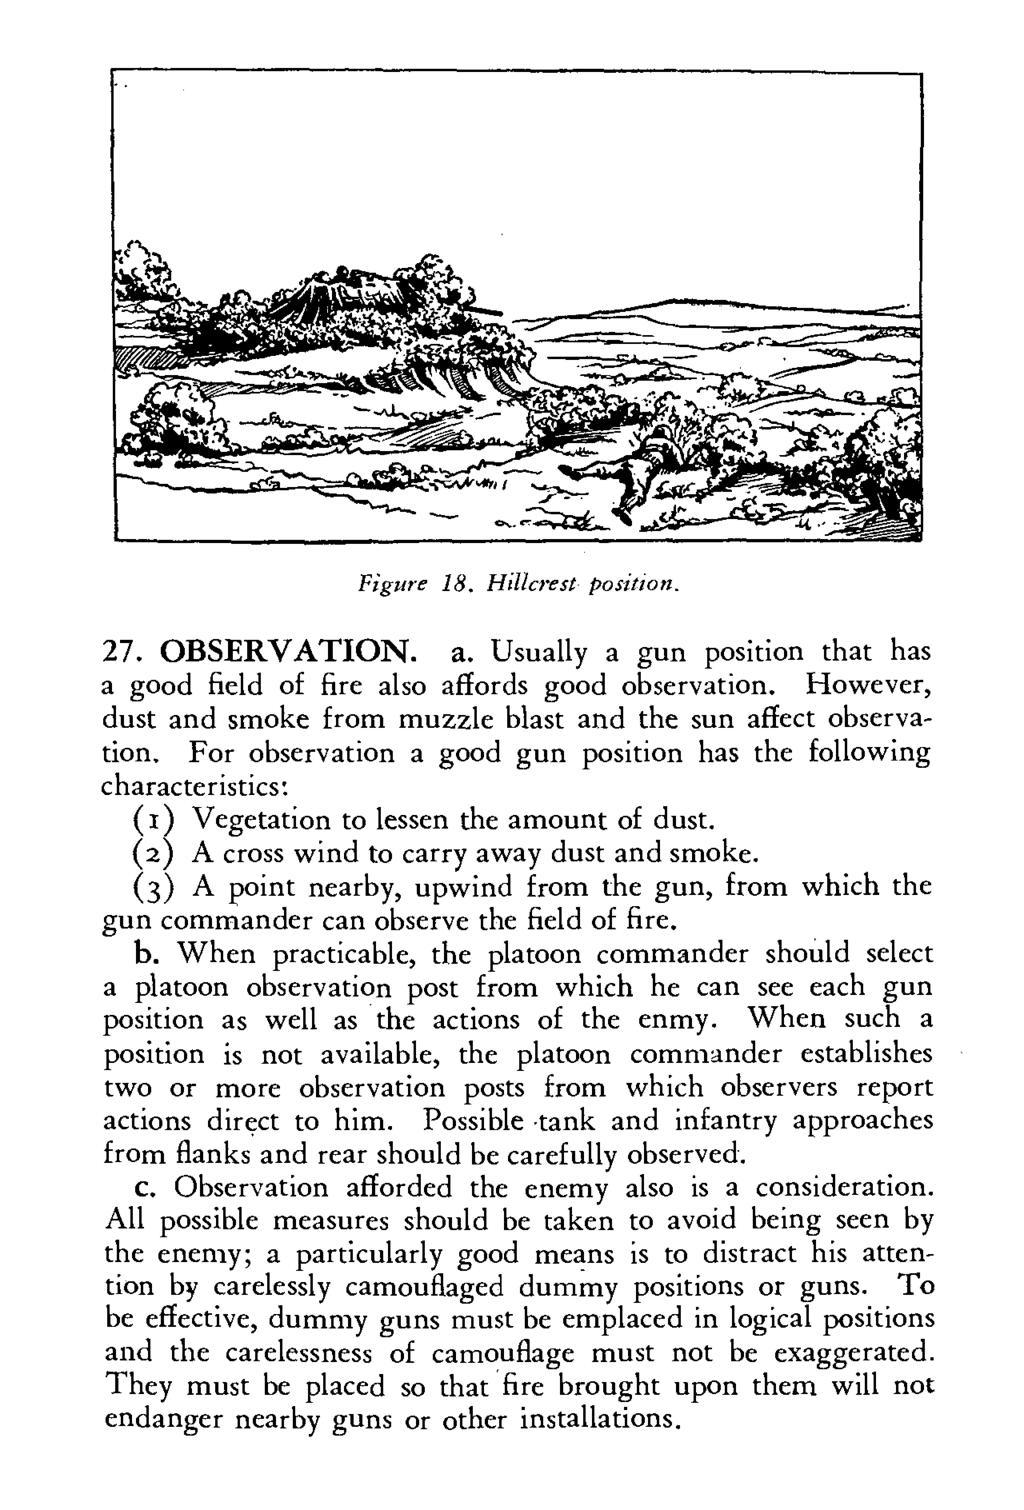 Figure 18. Hillcrest position. 27. OBSERVATION. a. Usually a gun position that has a good field of fire also affords good observation.